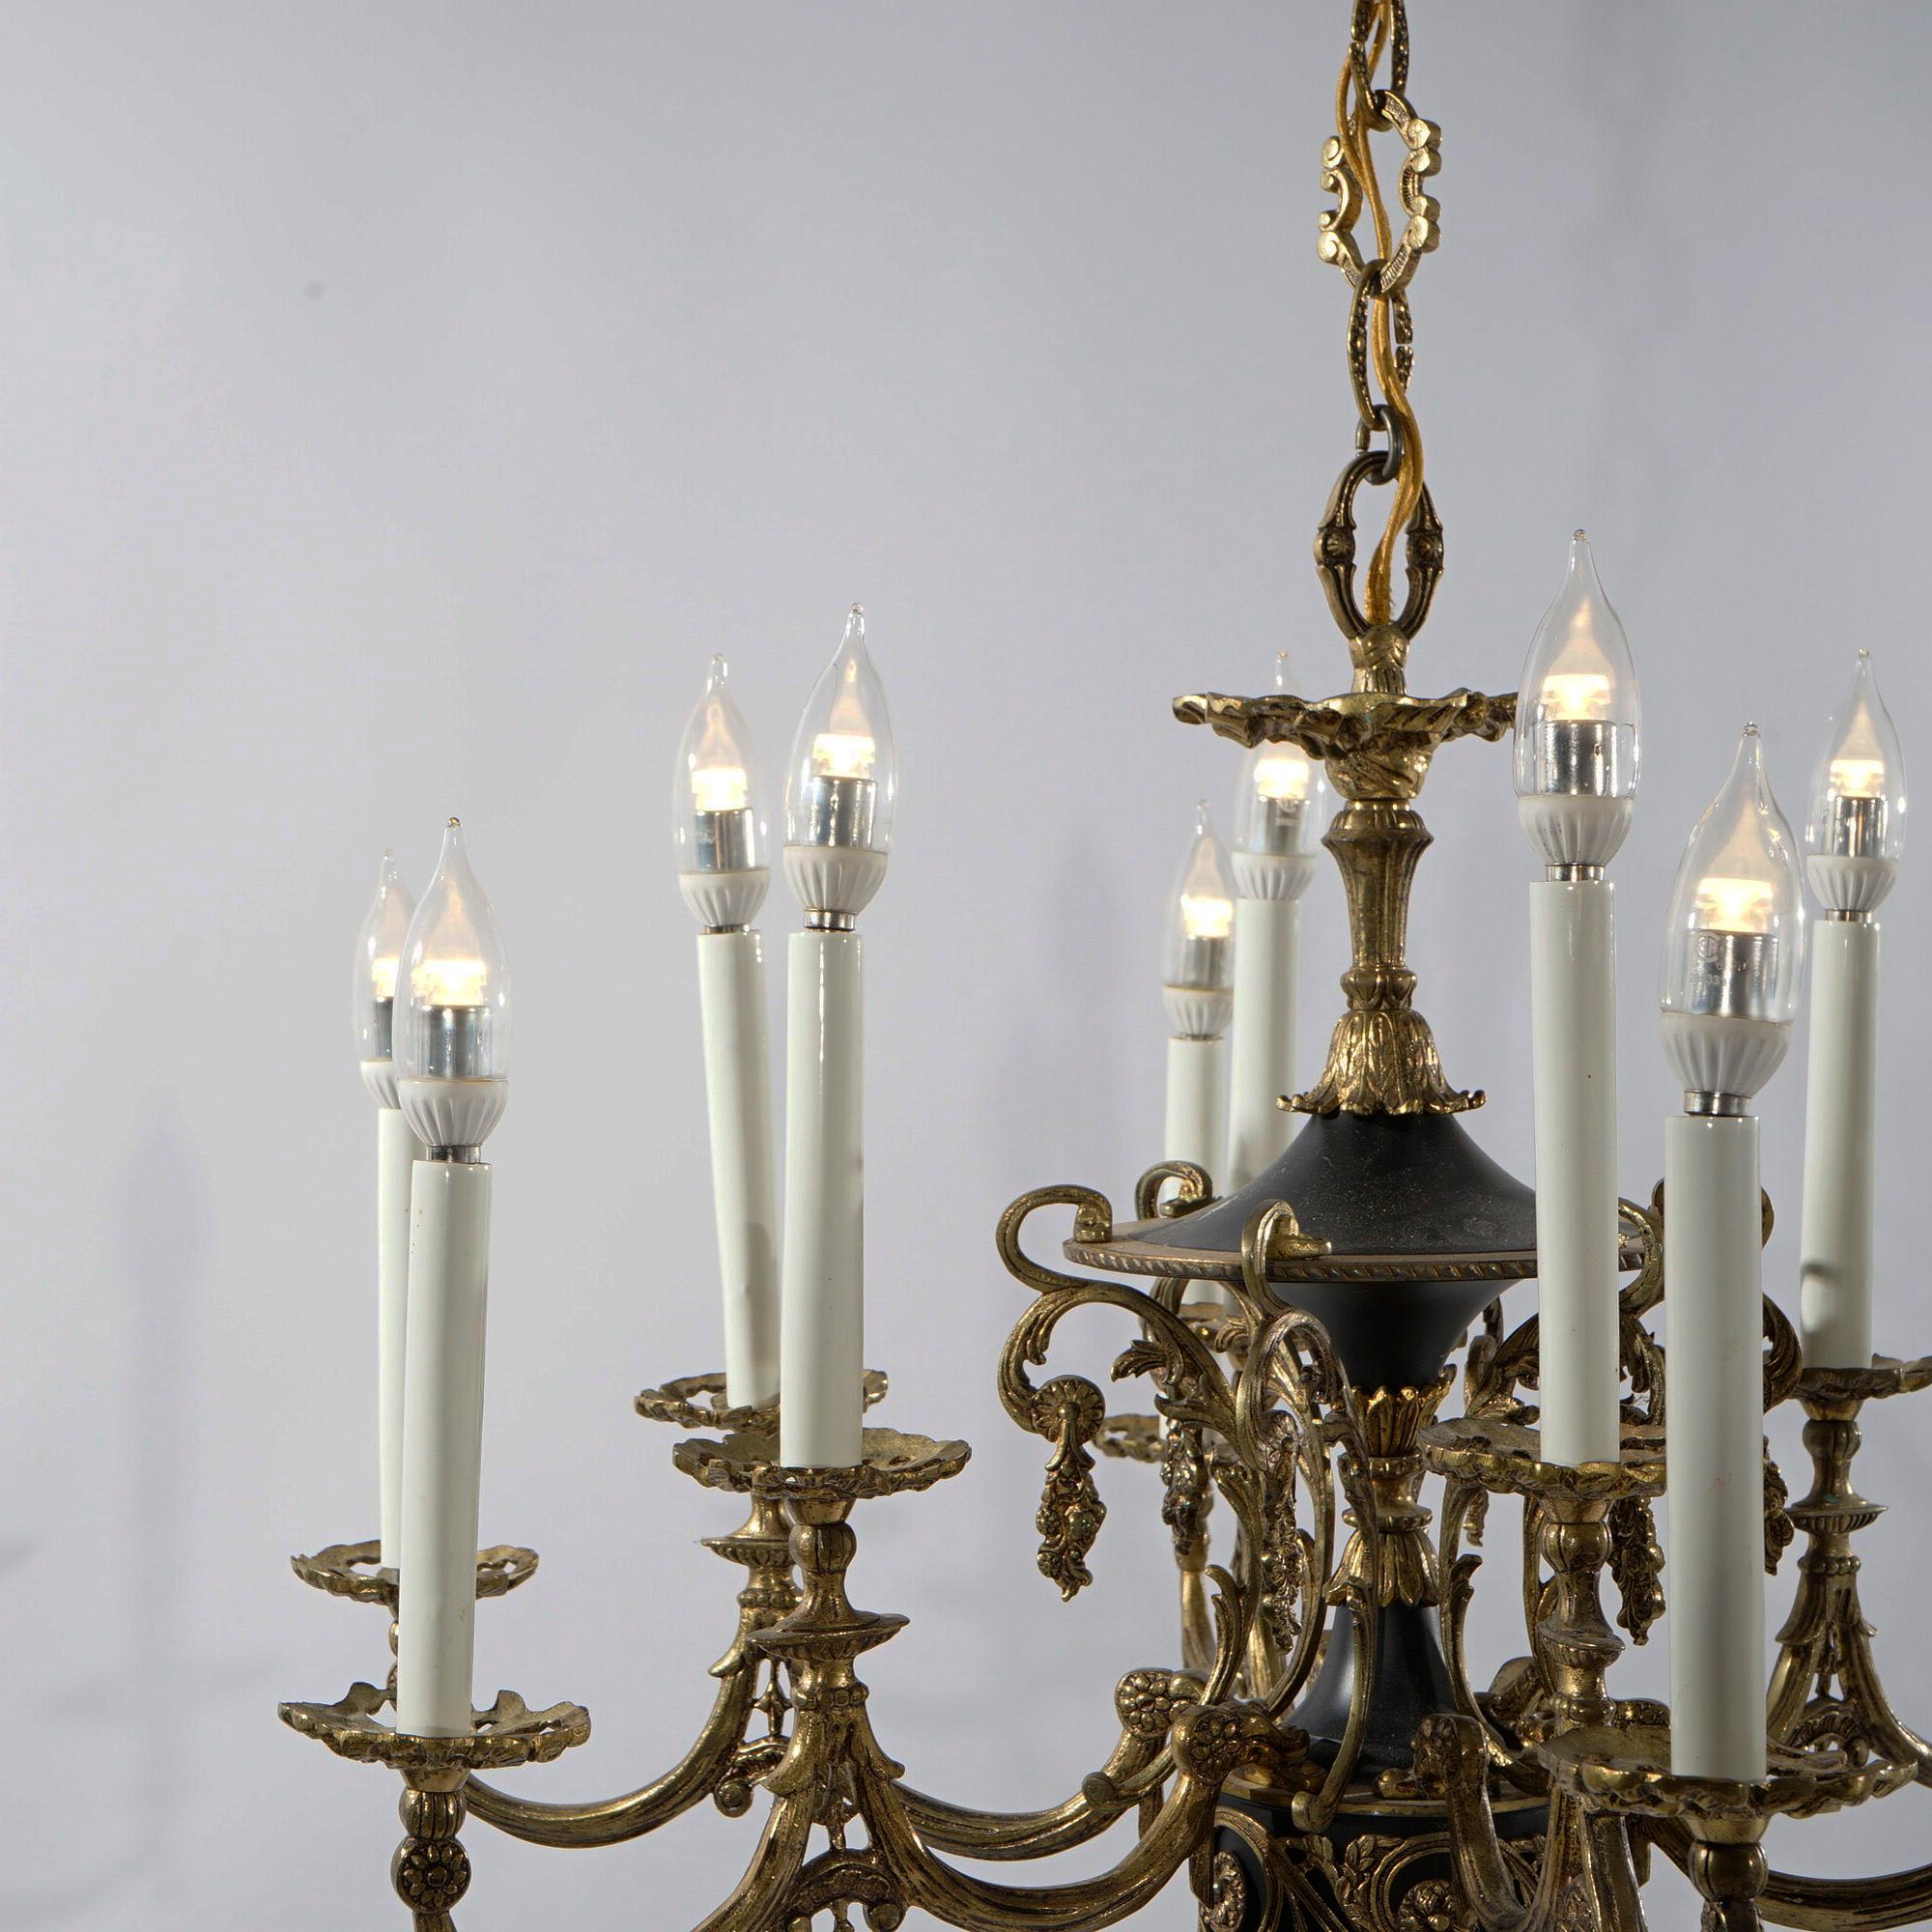 Antique French Empire Style Ebonized Bronze Twelve-Light Chandelier, Early 20thC For Sale 4